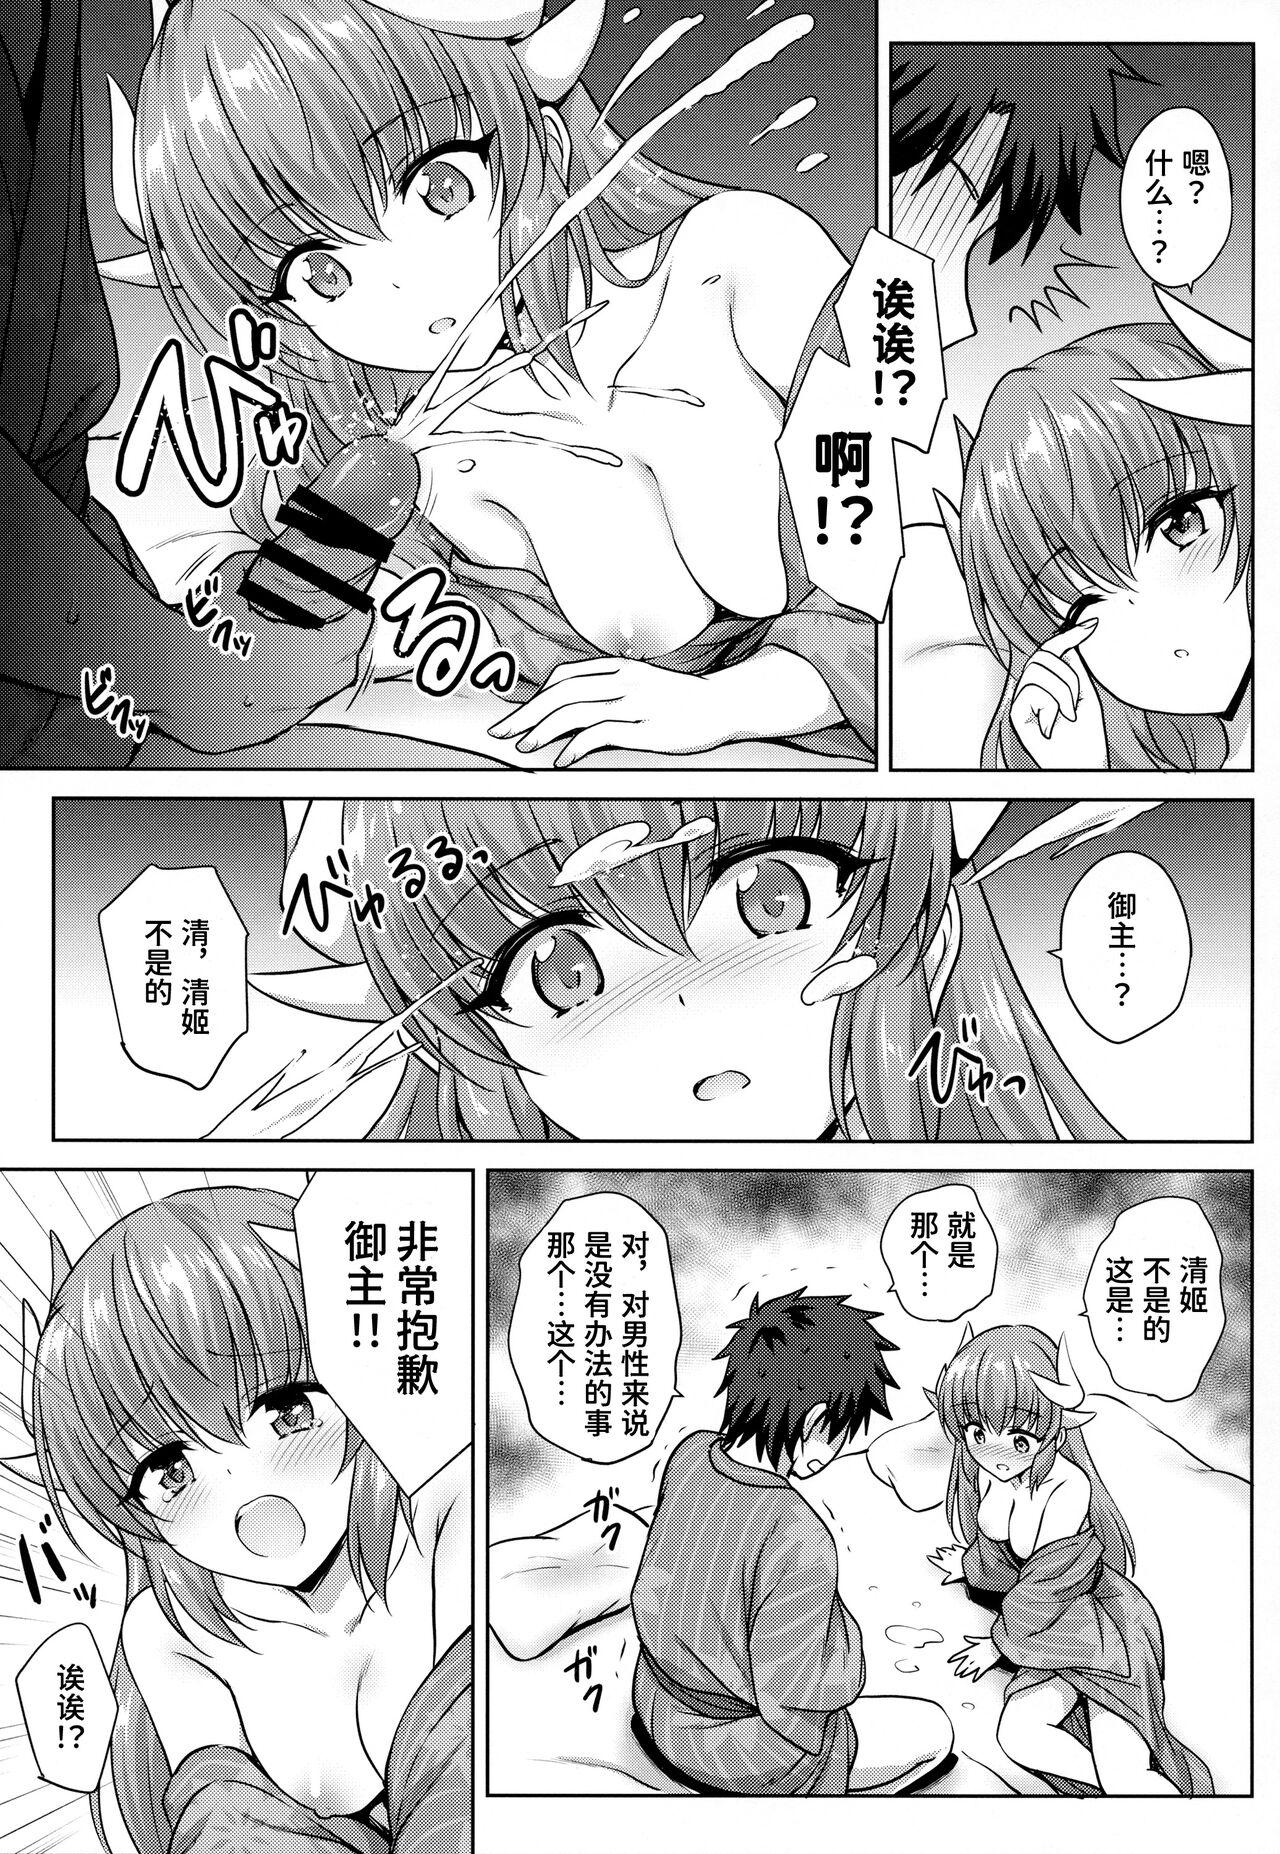 Jerkoff Kiyohime Onsen - Fate grand order Rubdown - Page 9